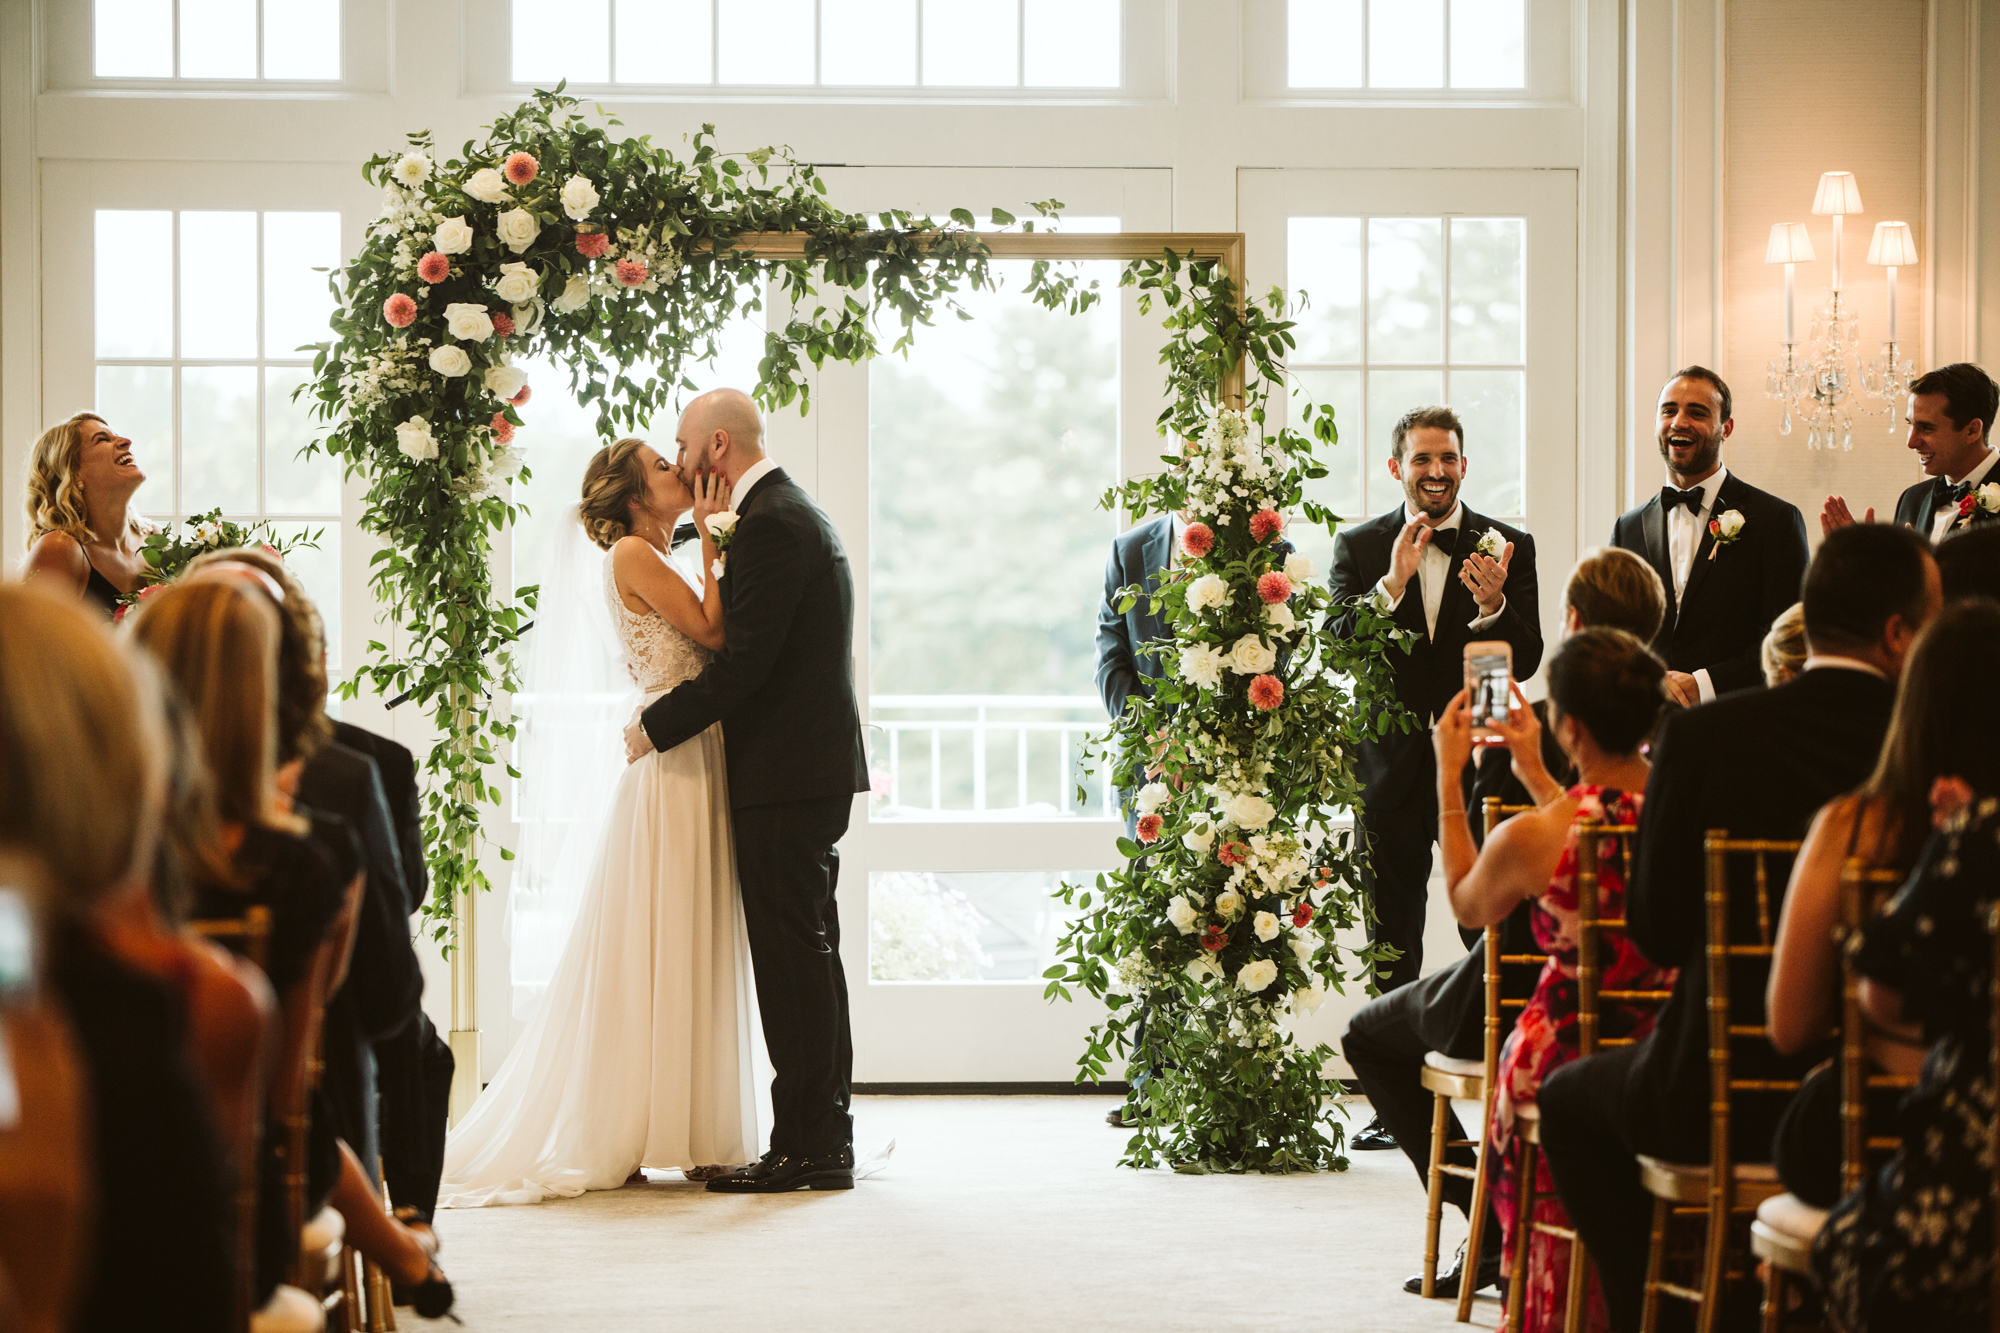 Elegant, Columbia Country Club, Chevy Chase Maryland, Baltimore Wedding Photographer, Classic, Traditional, Jewish Wedding, Bride and Groom Under Floral Archway, Meg Owen Floral Designs, First Kiss